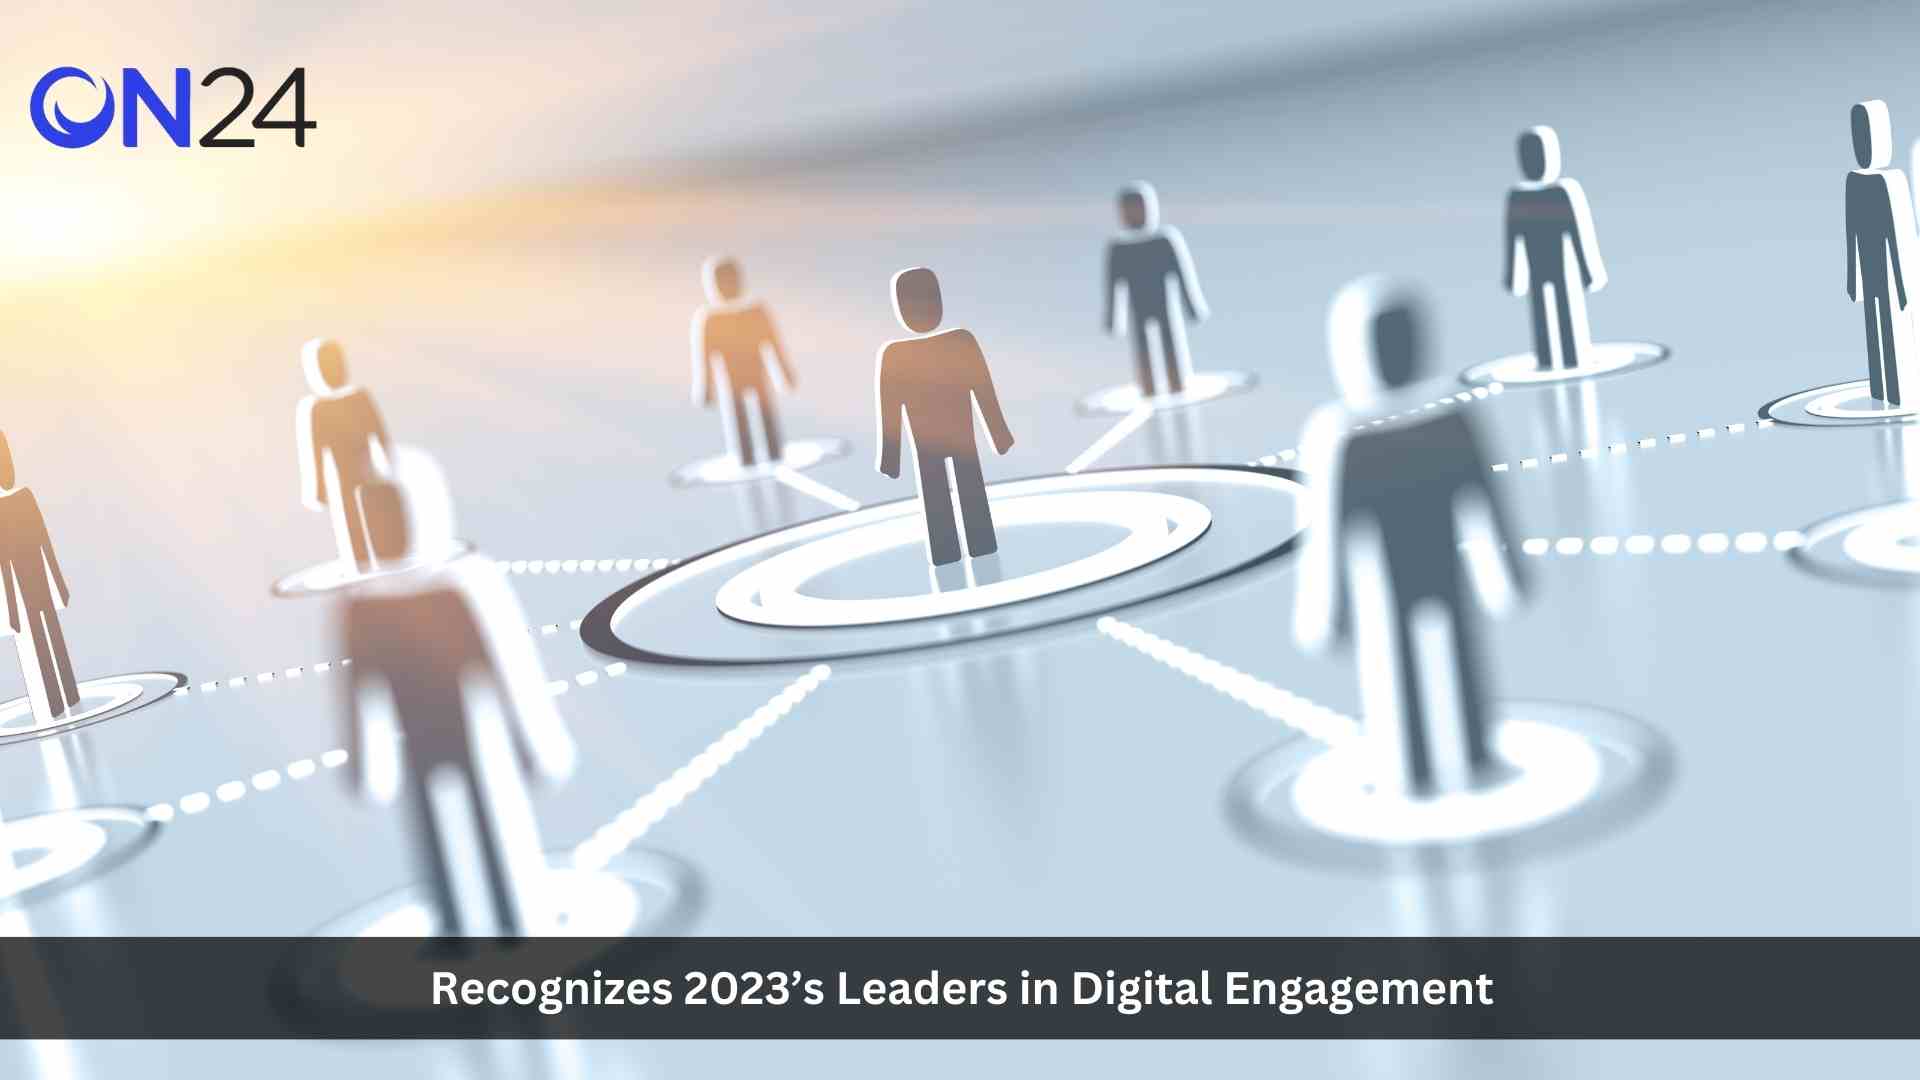 ON24 Recognizes 2023’s Leaders in Digital Engagement